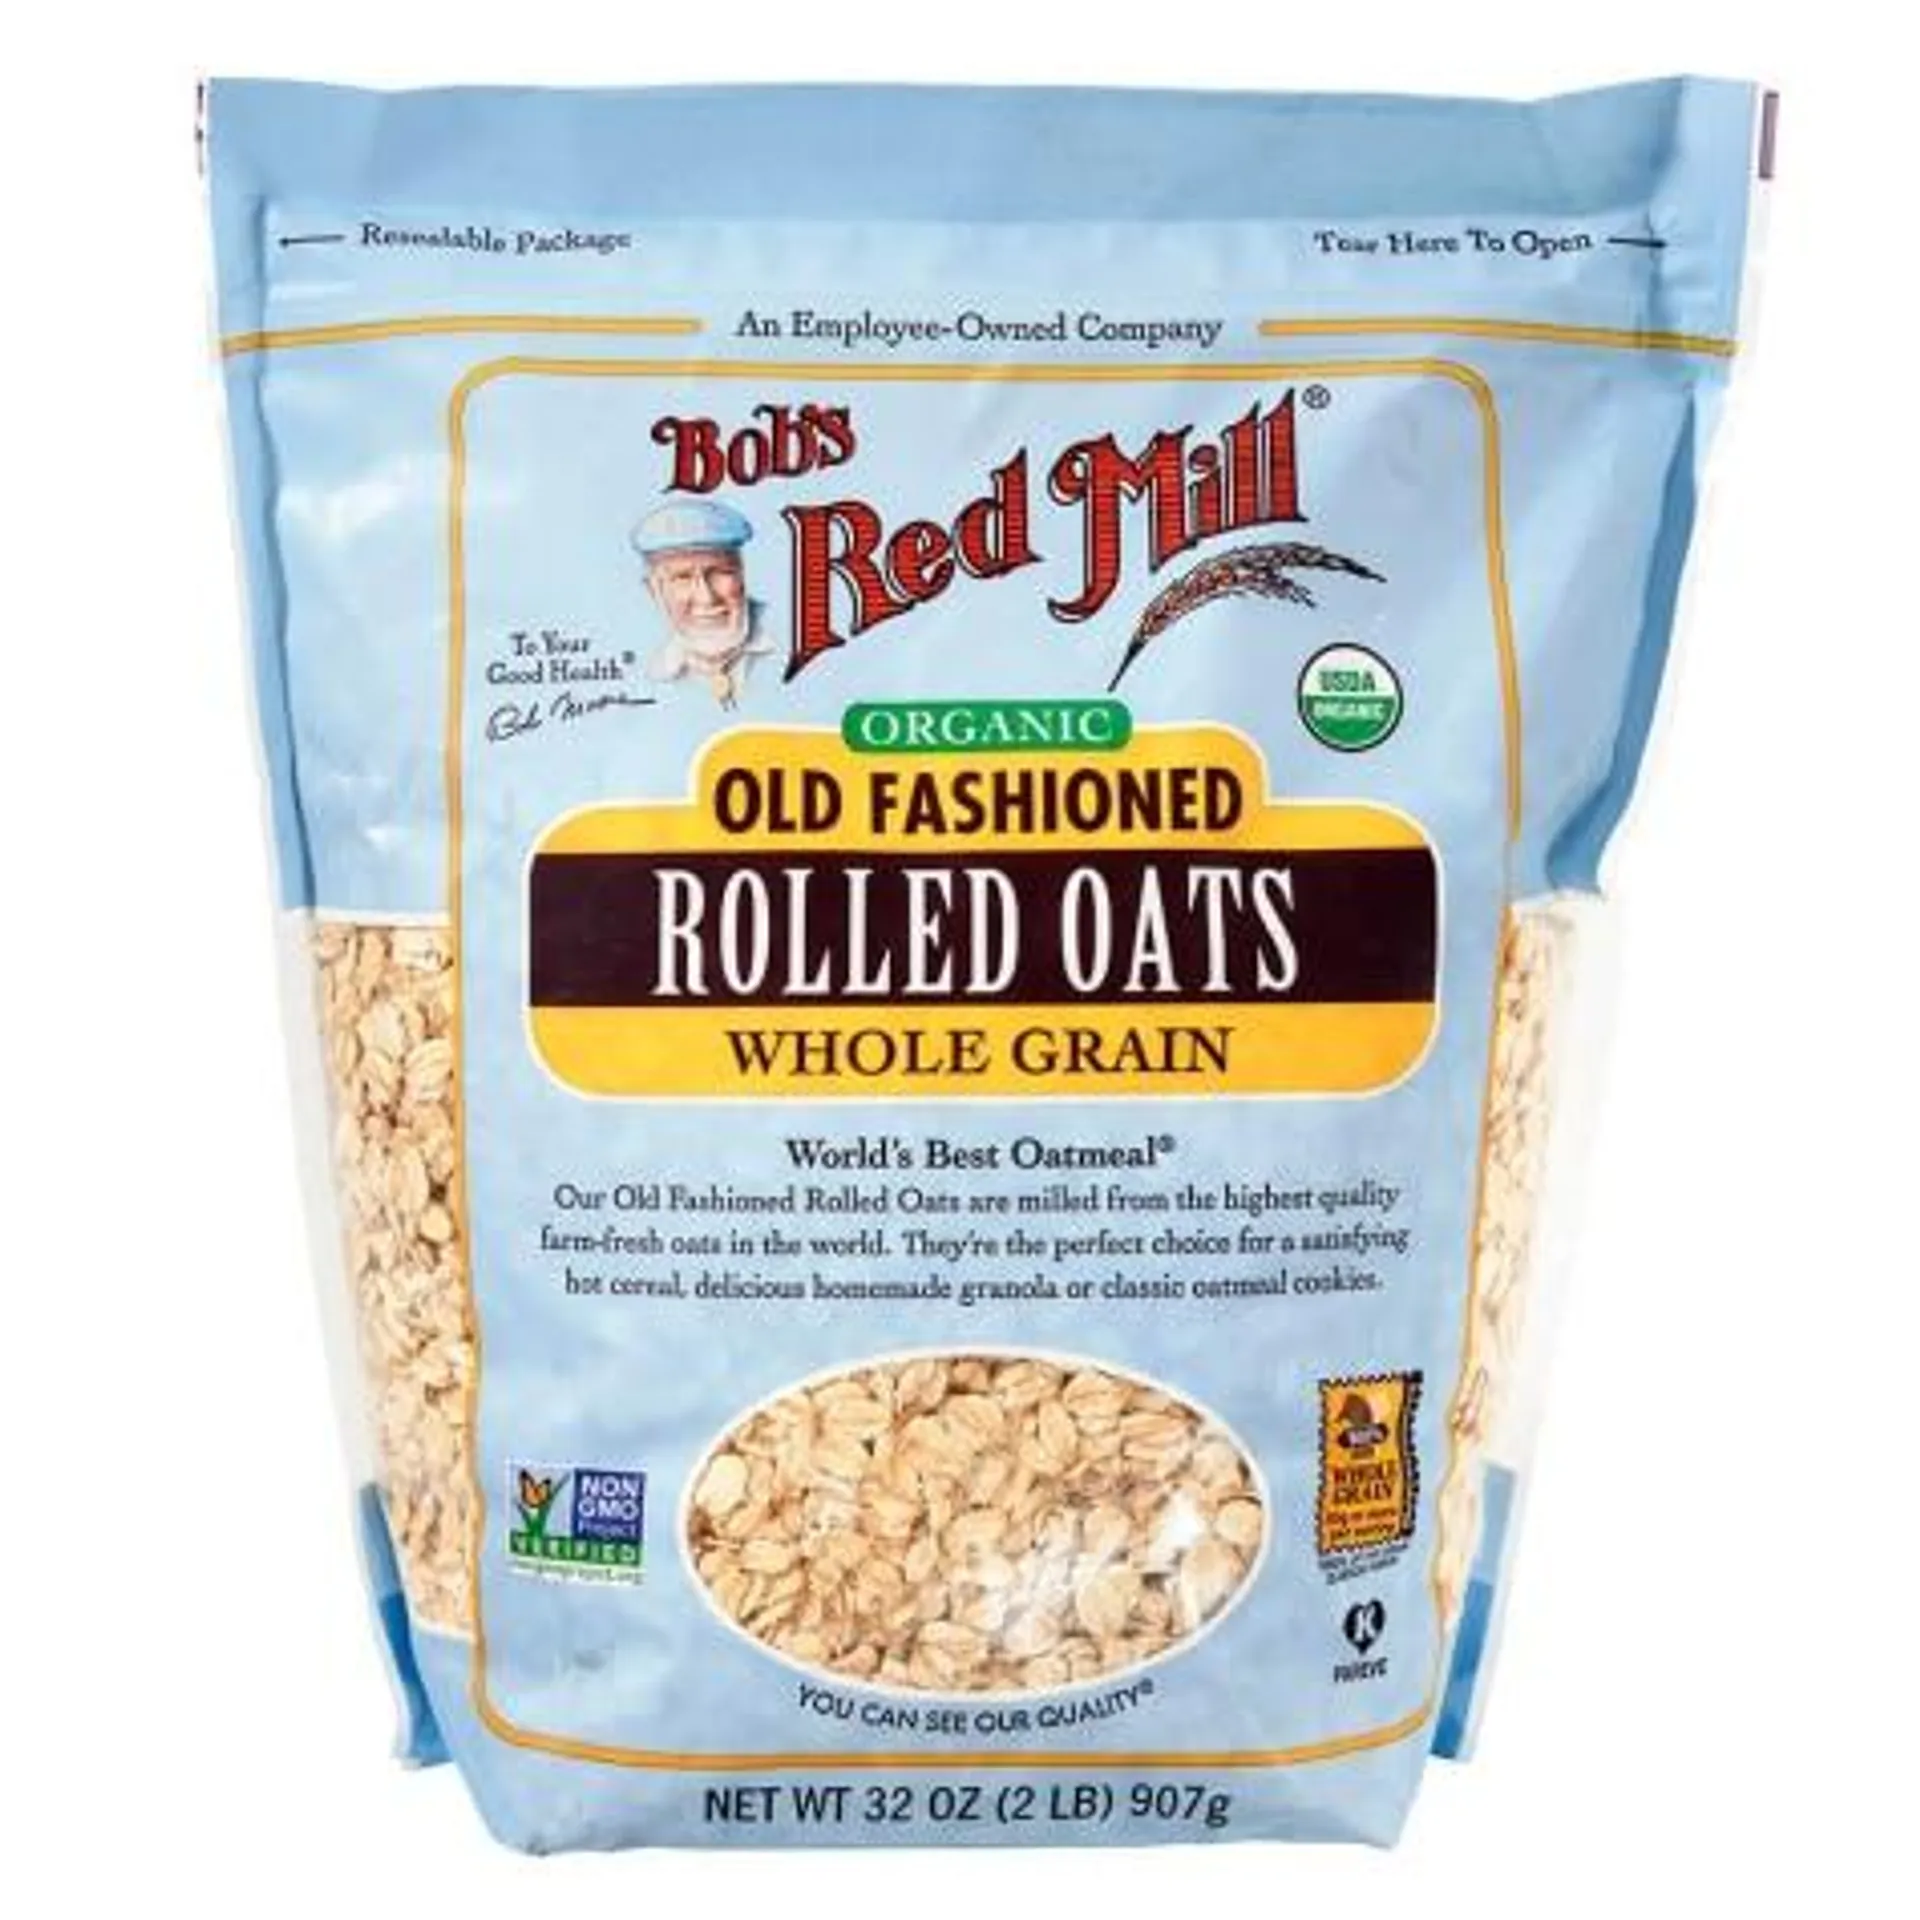 Bob's Red Mill Old Fashioned Whole Grain Rolled Oats, 32 oz